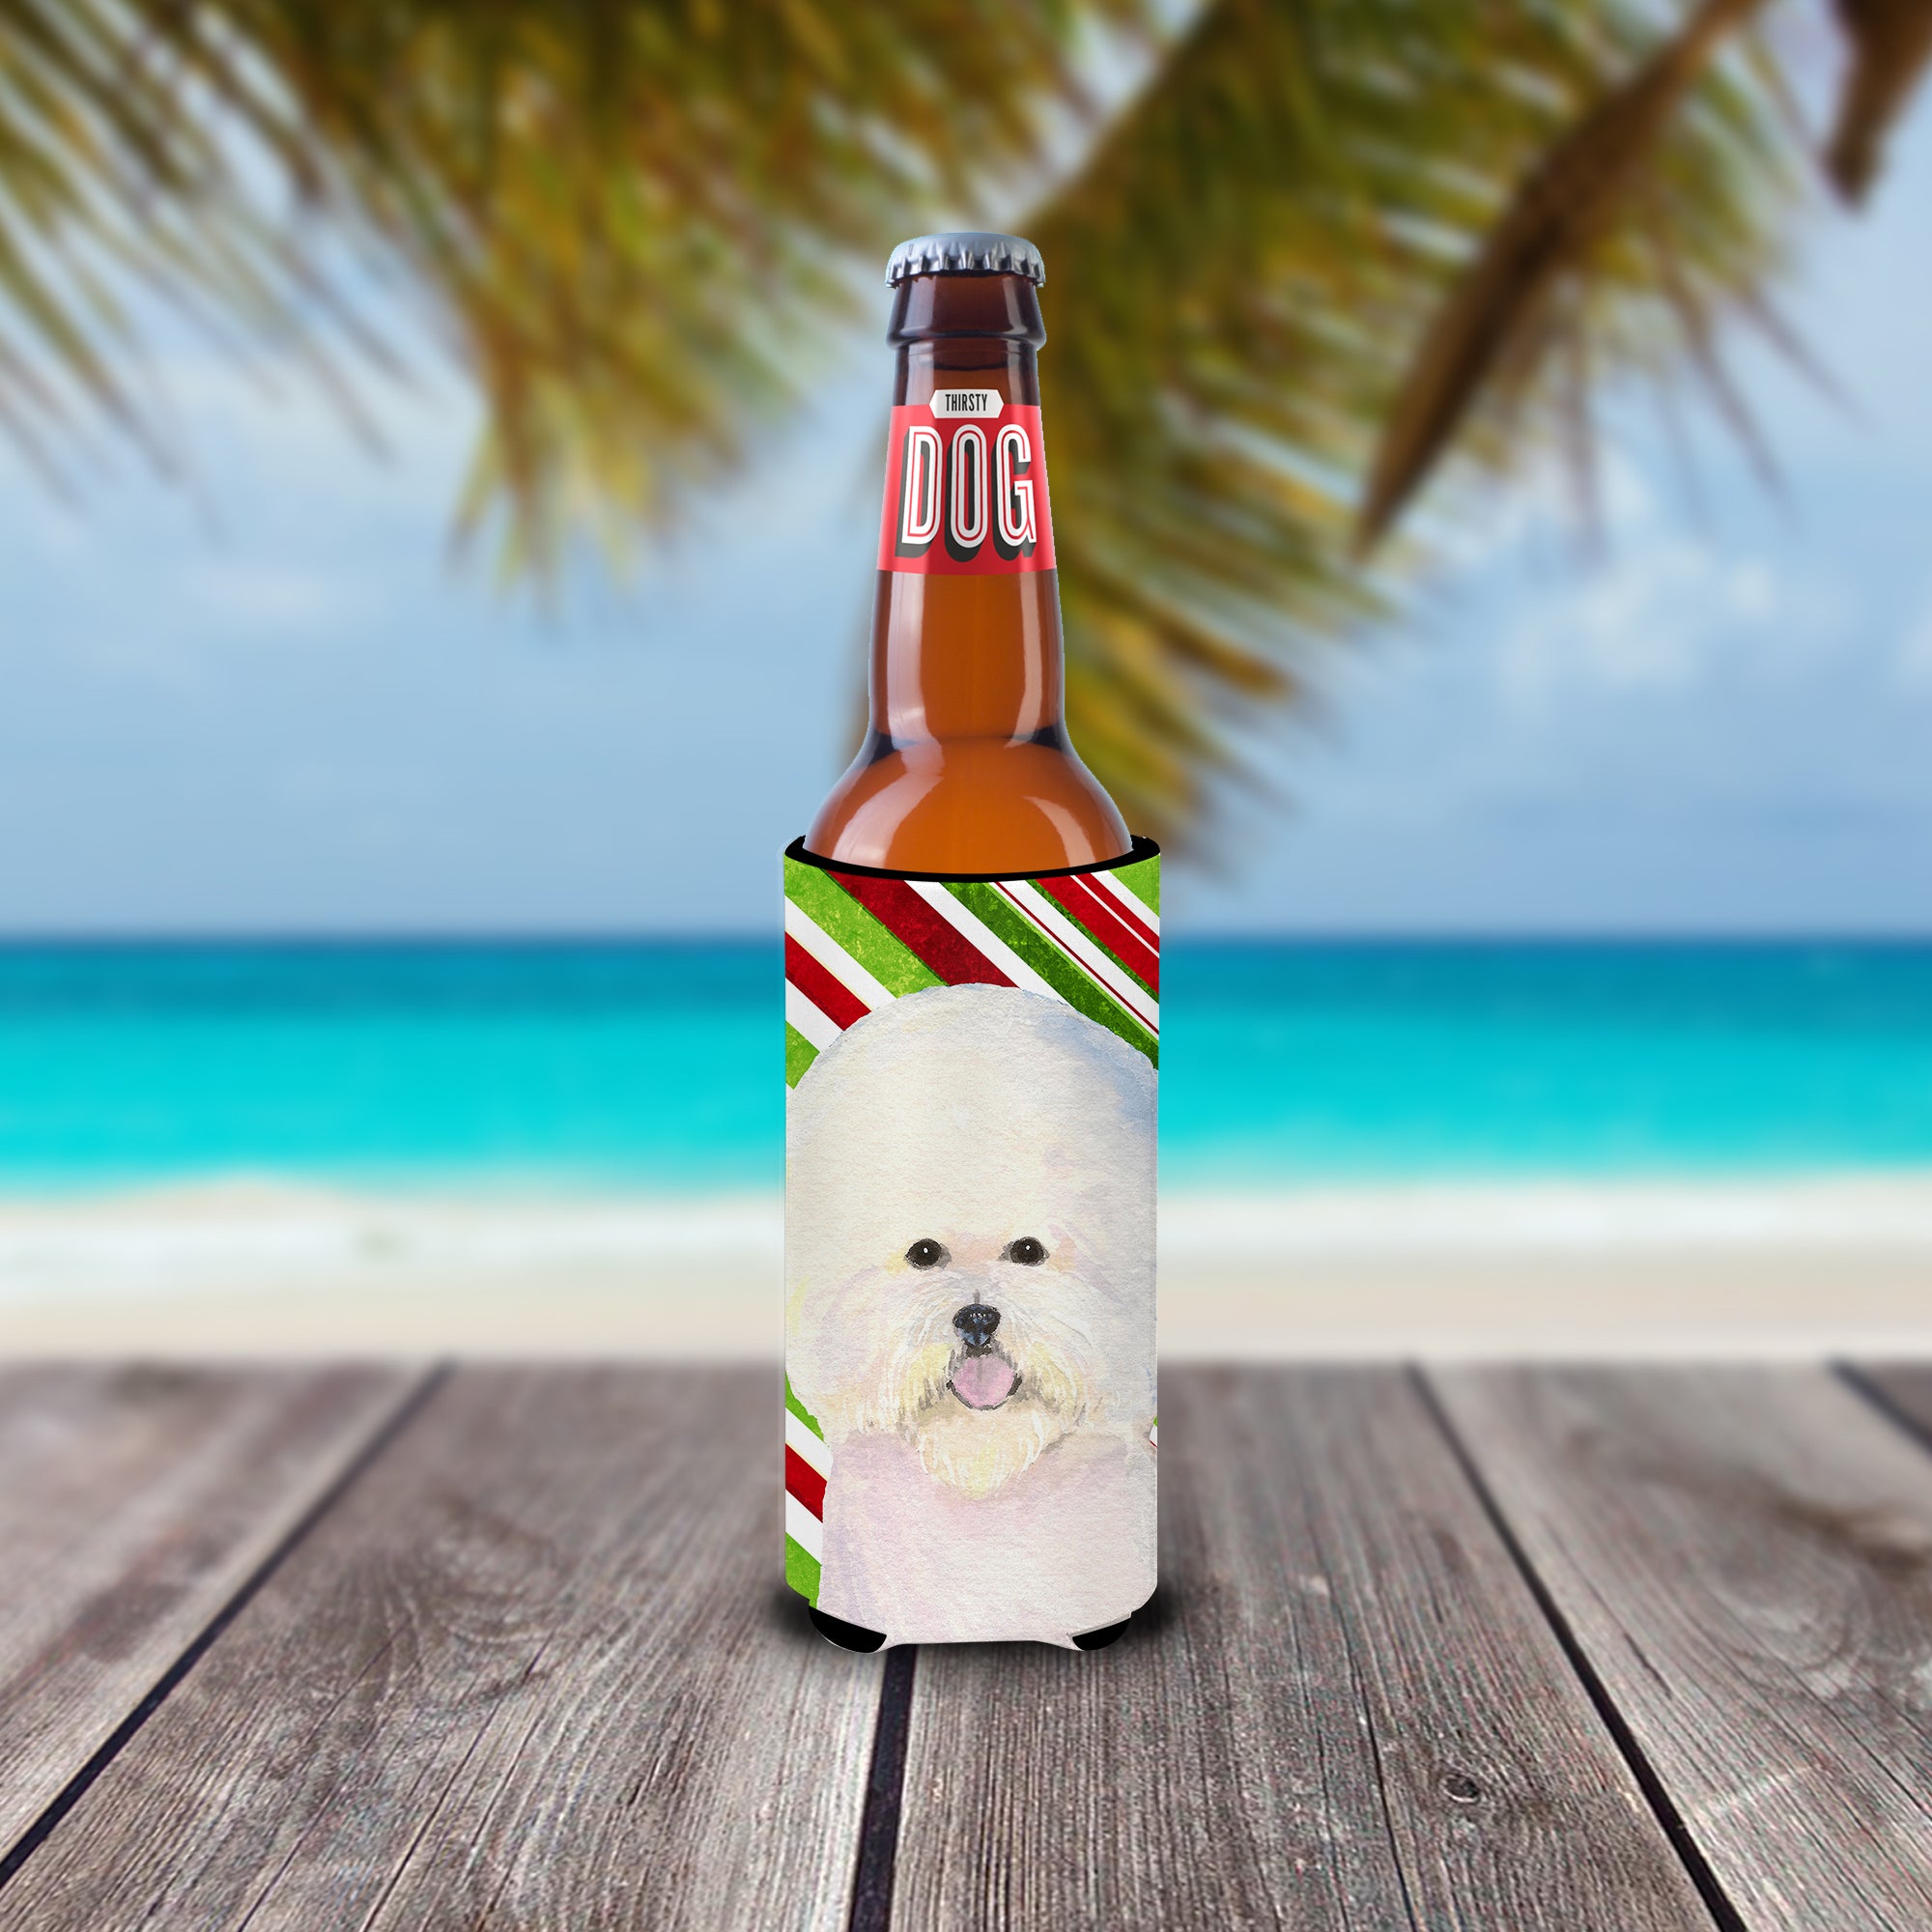 Bichon Frise Candy Cane Holiday Christmas Ultra Beverage Insulators for slim cans SS4595MUK.